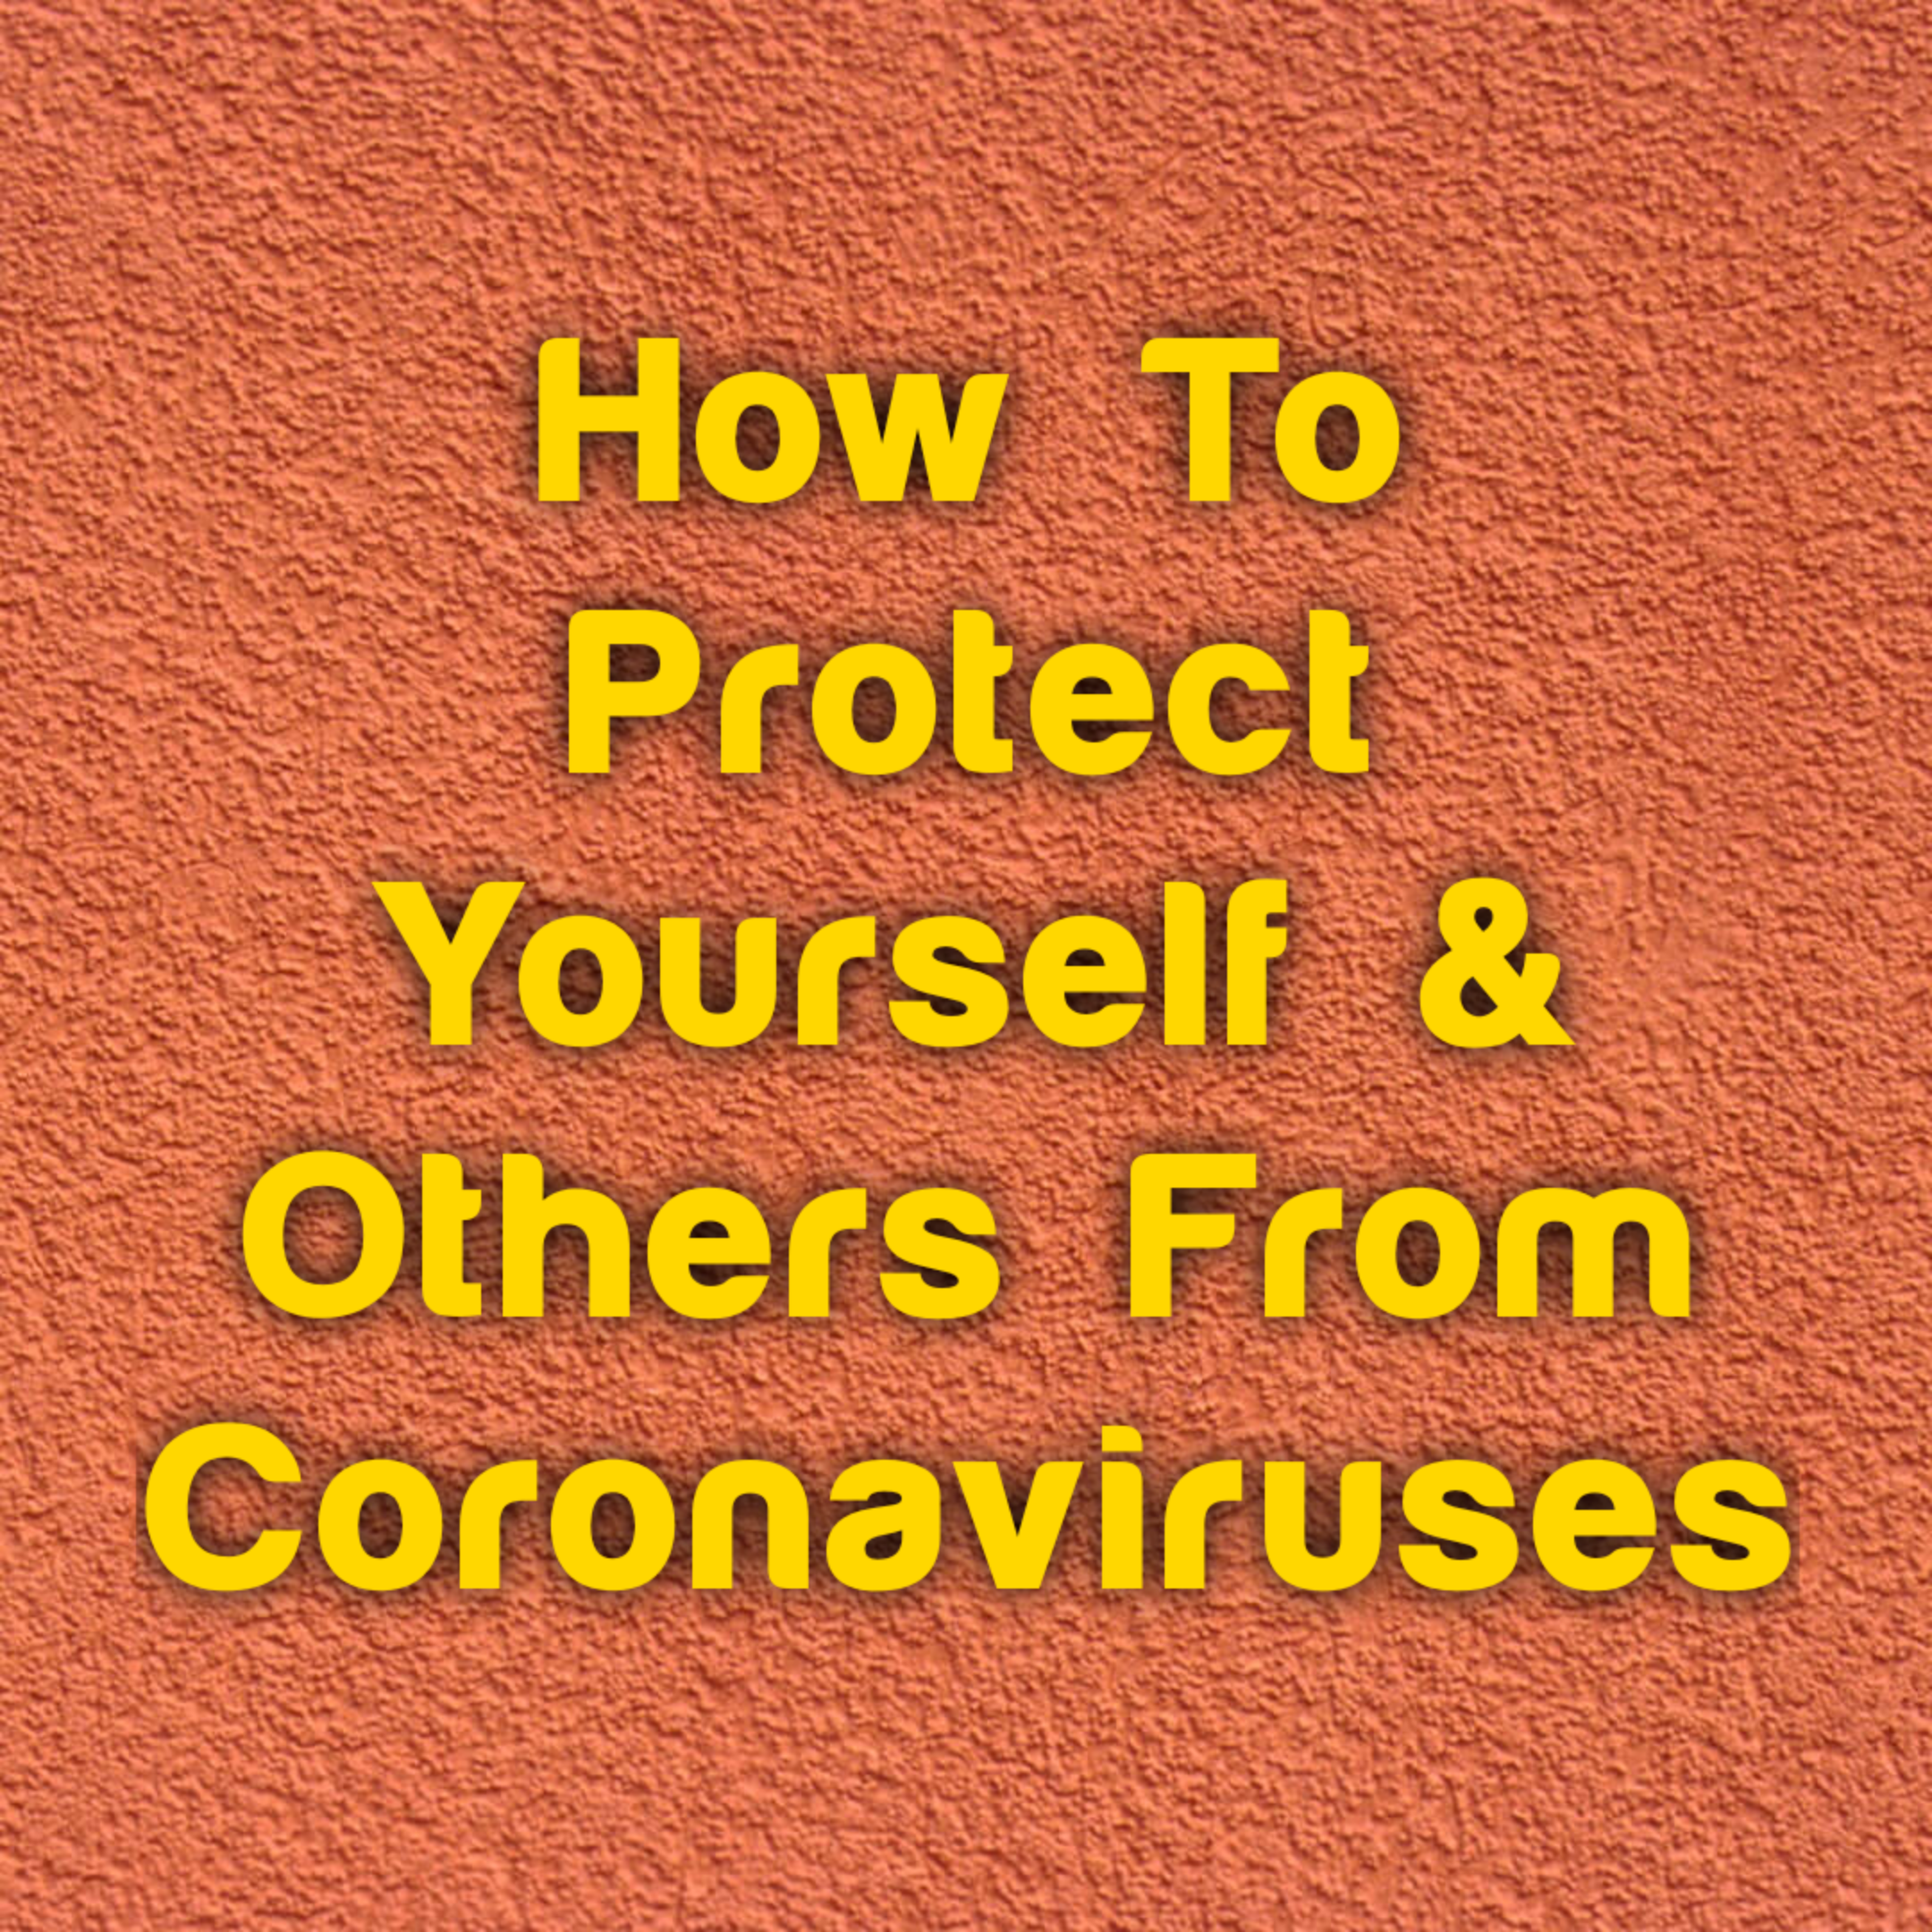 How To Protect Yourself & Others From Coronaviruses